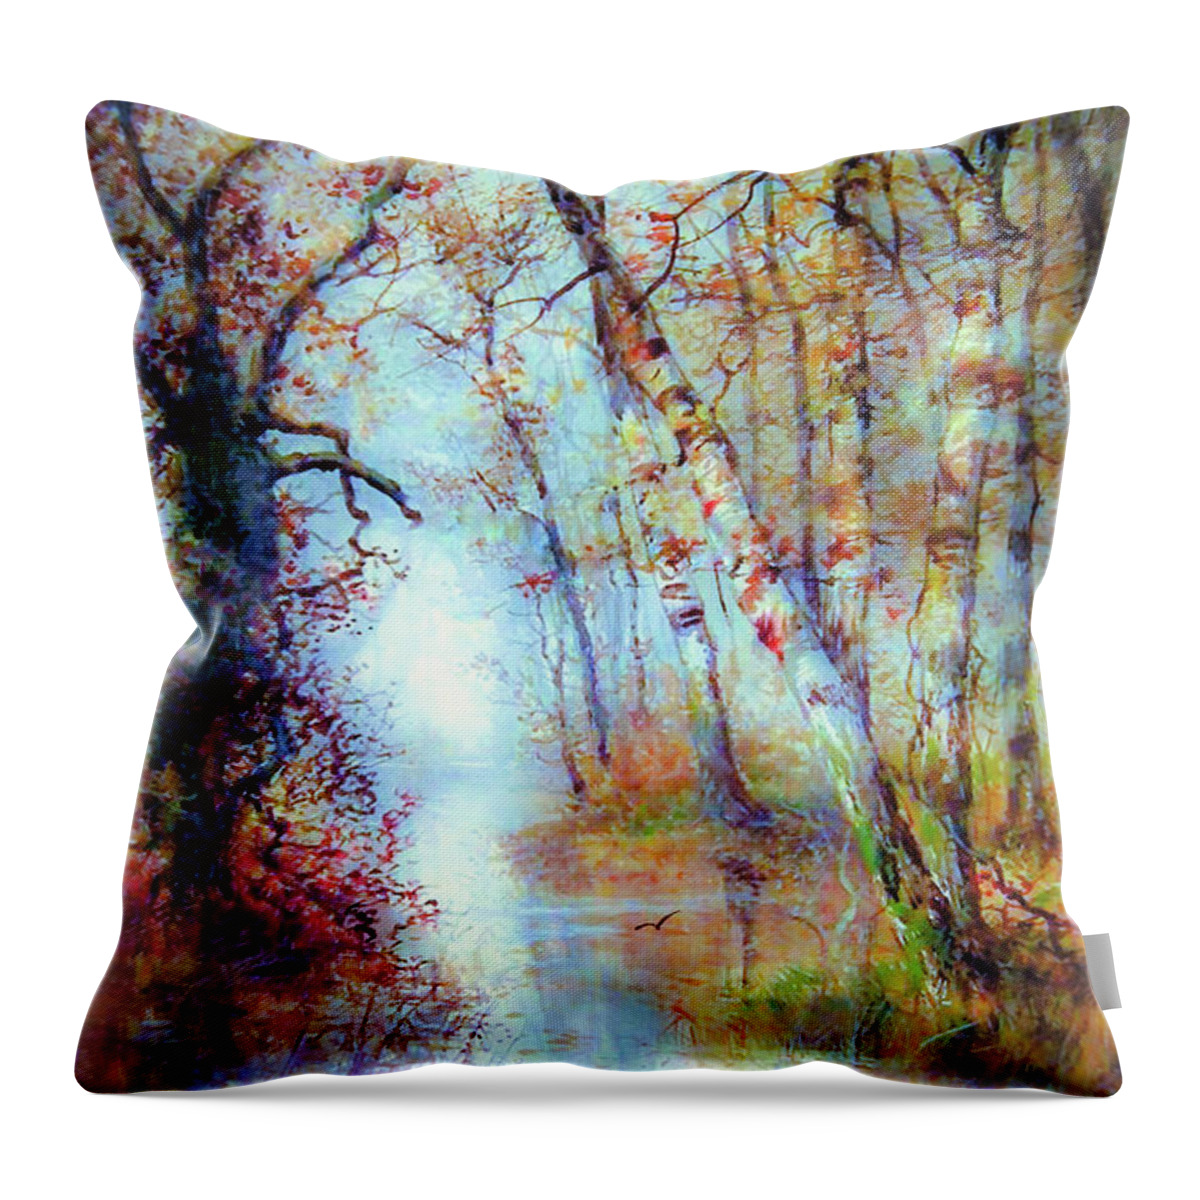 Landscape Throw Pillow featuring the painting Magical Misty Morning by Jane Small